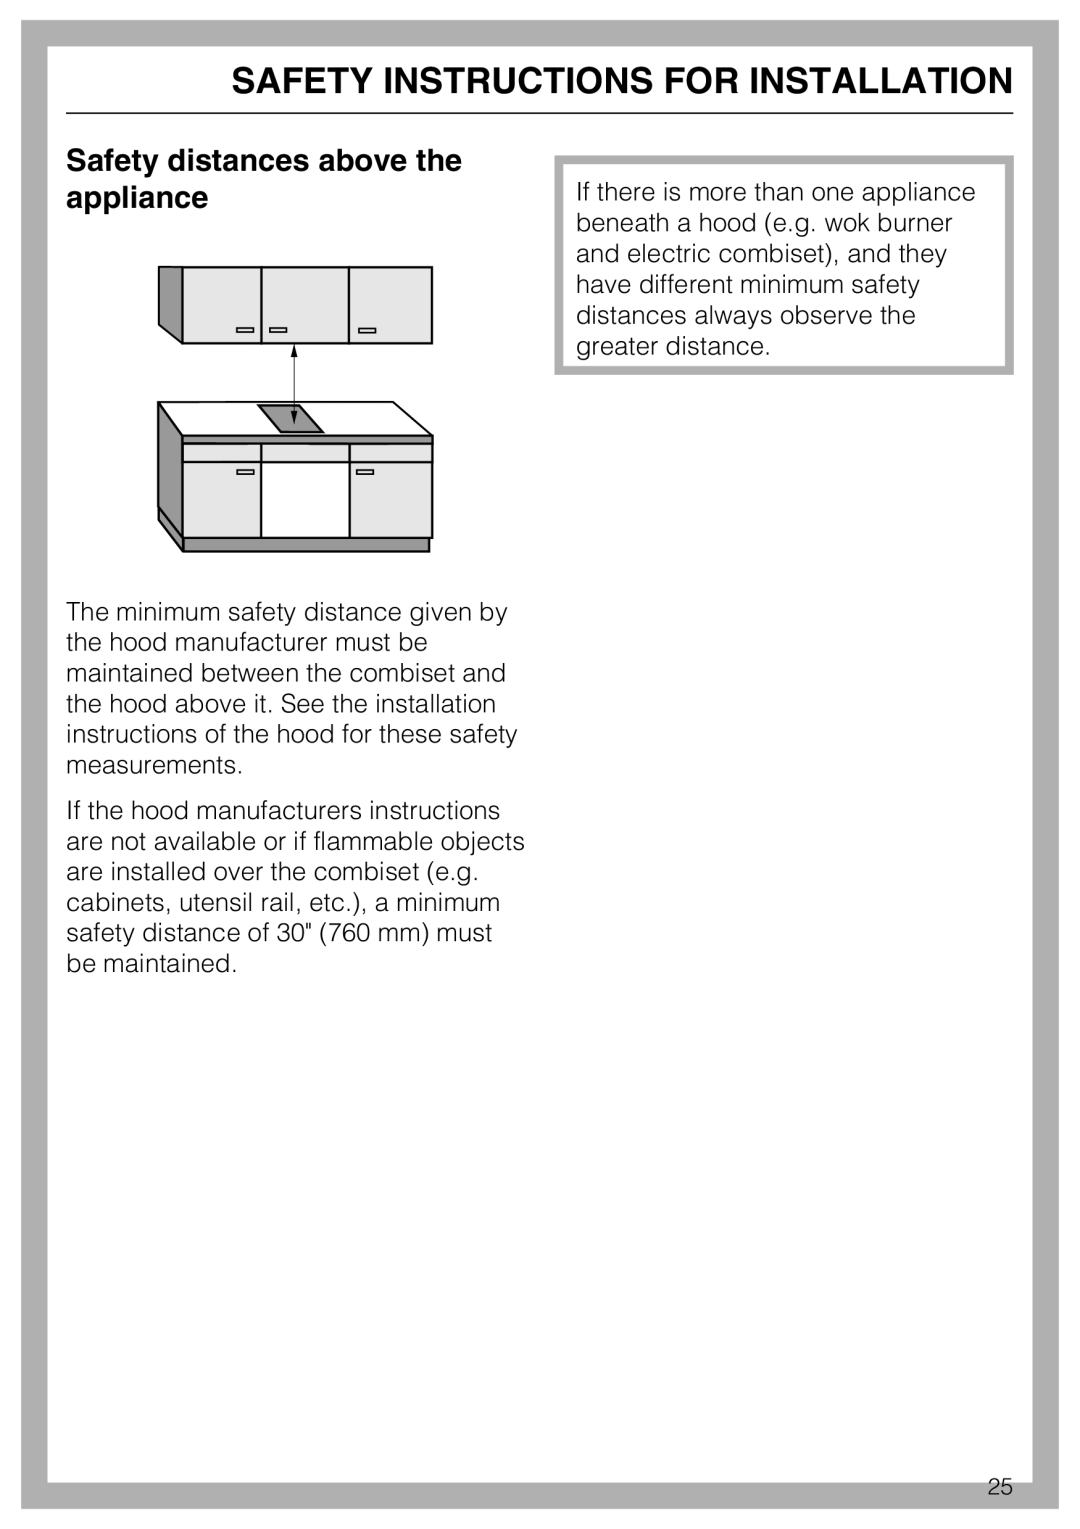 Miele CS 1223 installation instructions Safety distances above the appliance, Safety Instructions For Installation 